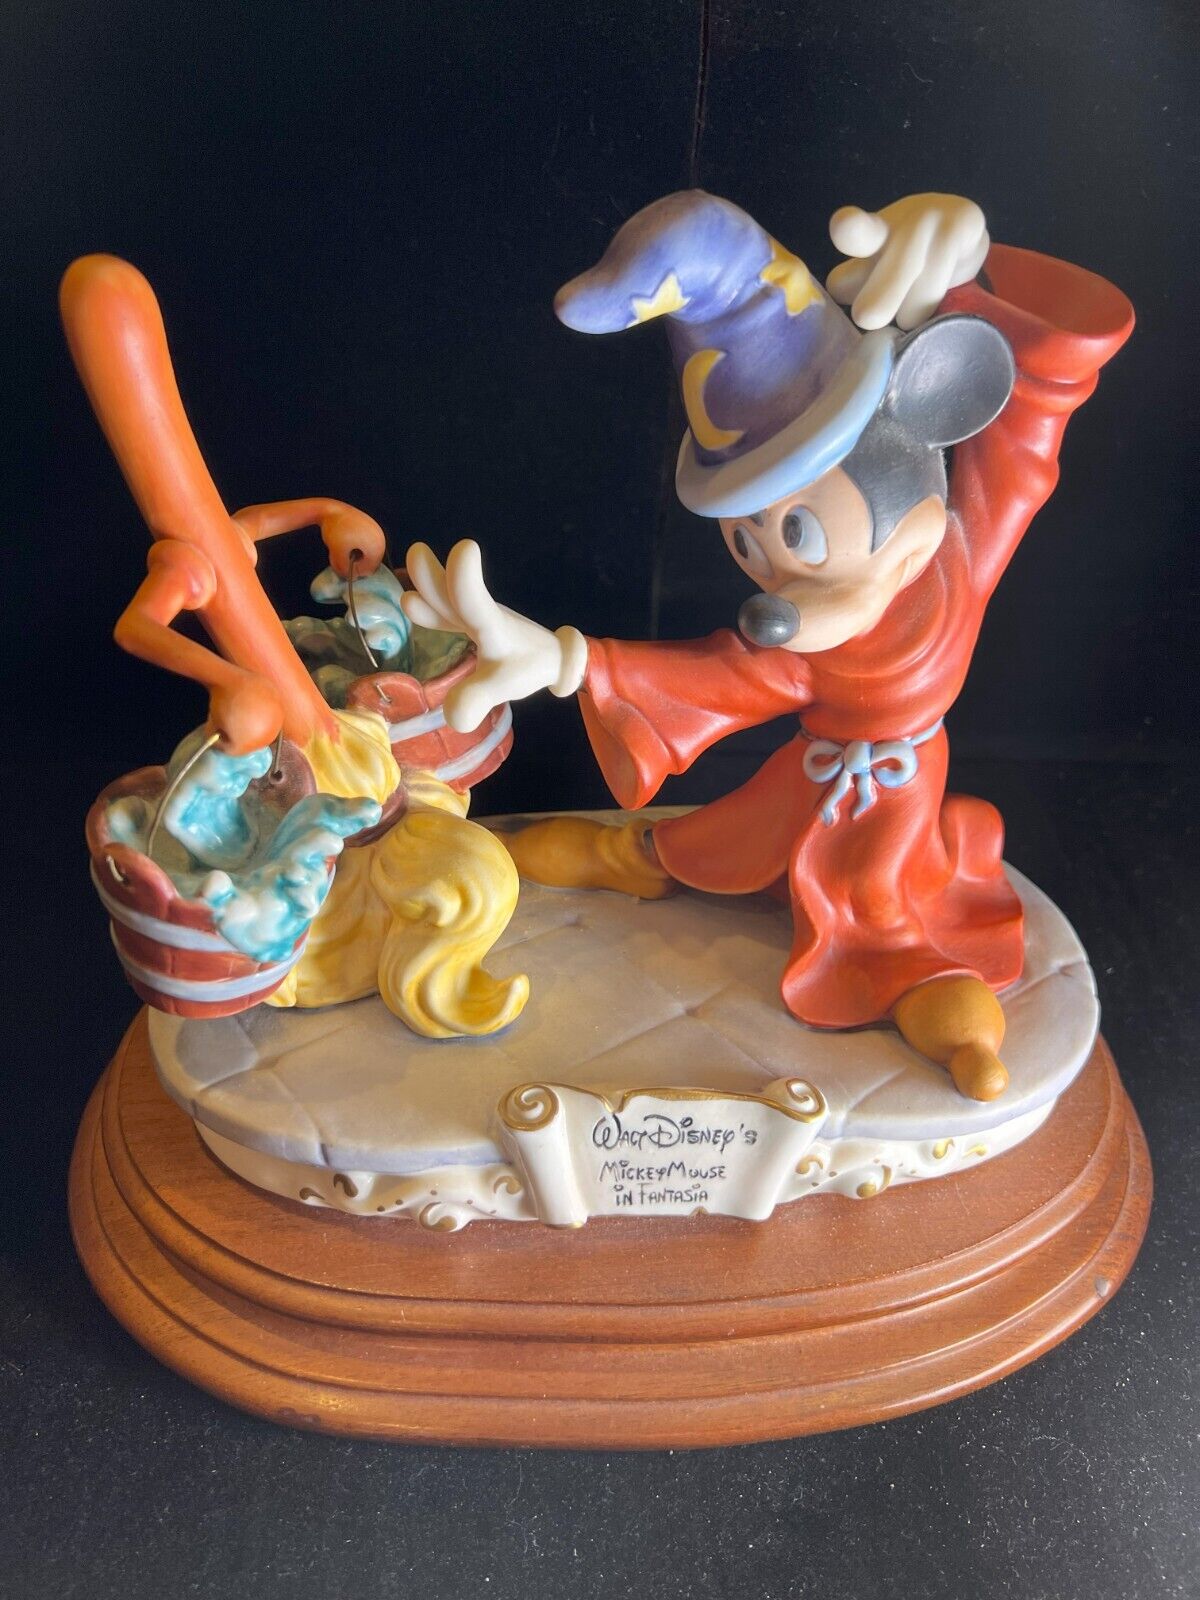 Laurenz Disney Capodimonte Mickey Mouse in Fantasia 710 of 5000 made in Italy